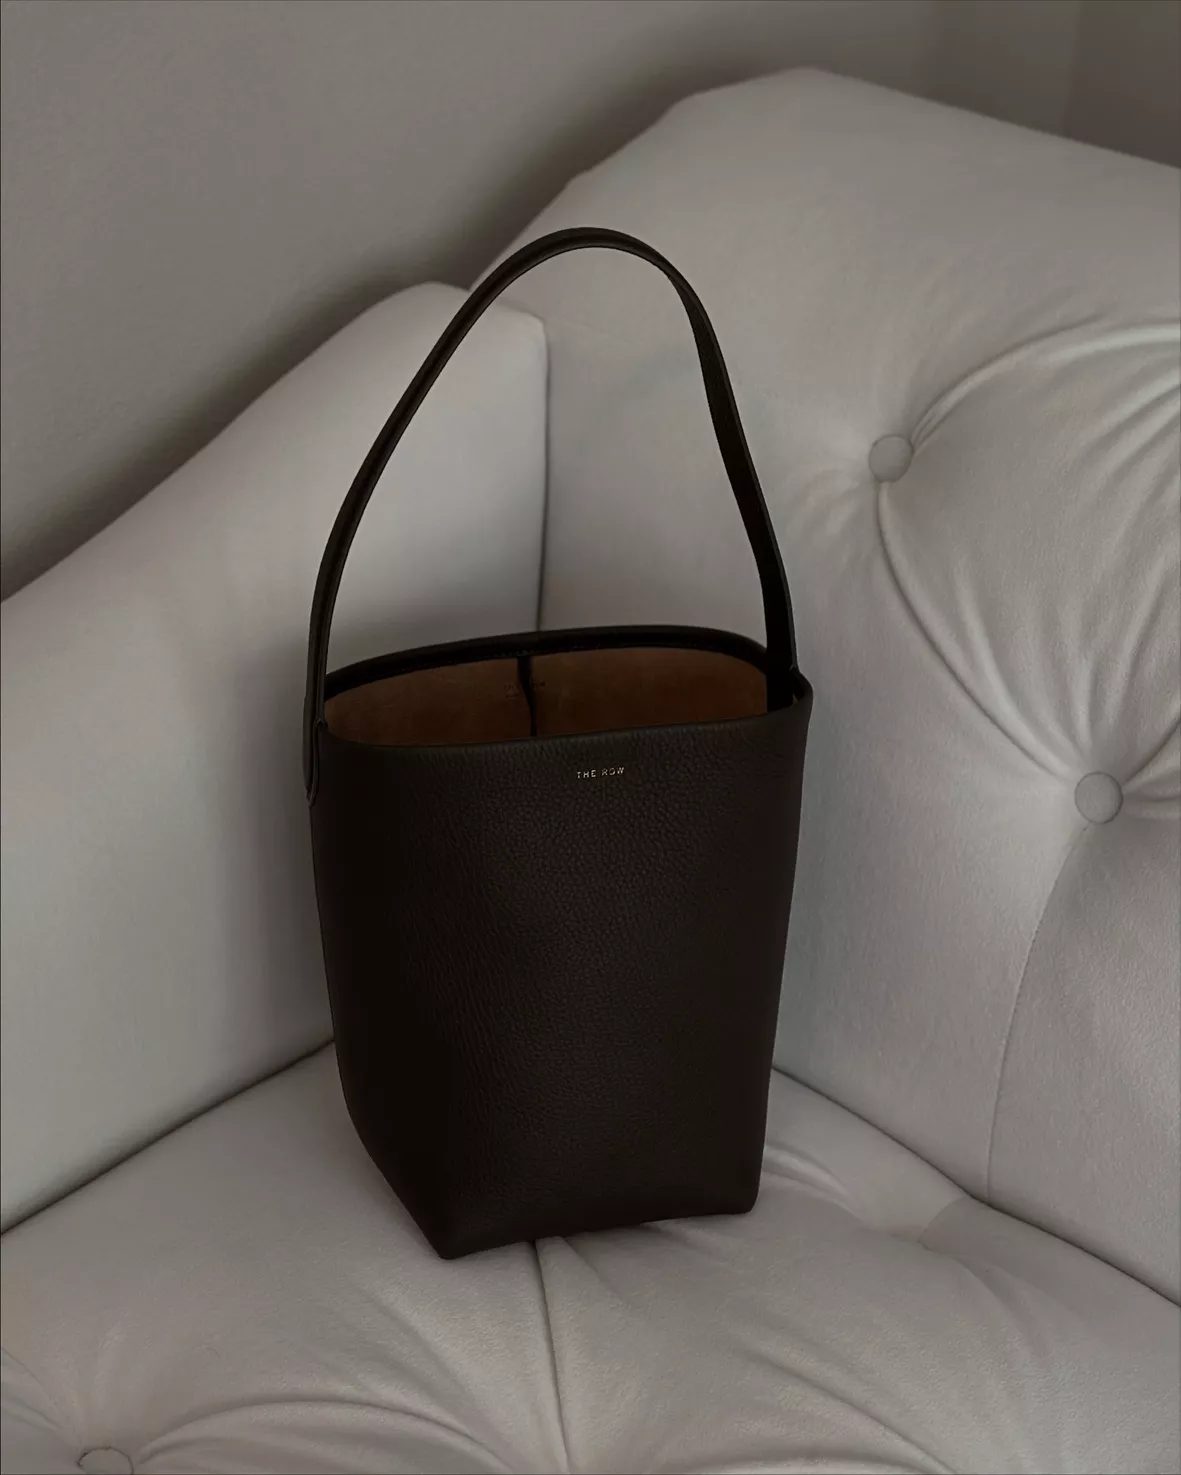 The Row Carryall Tote in Brown